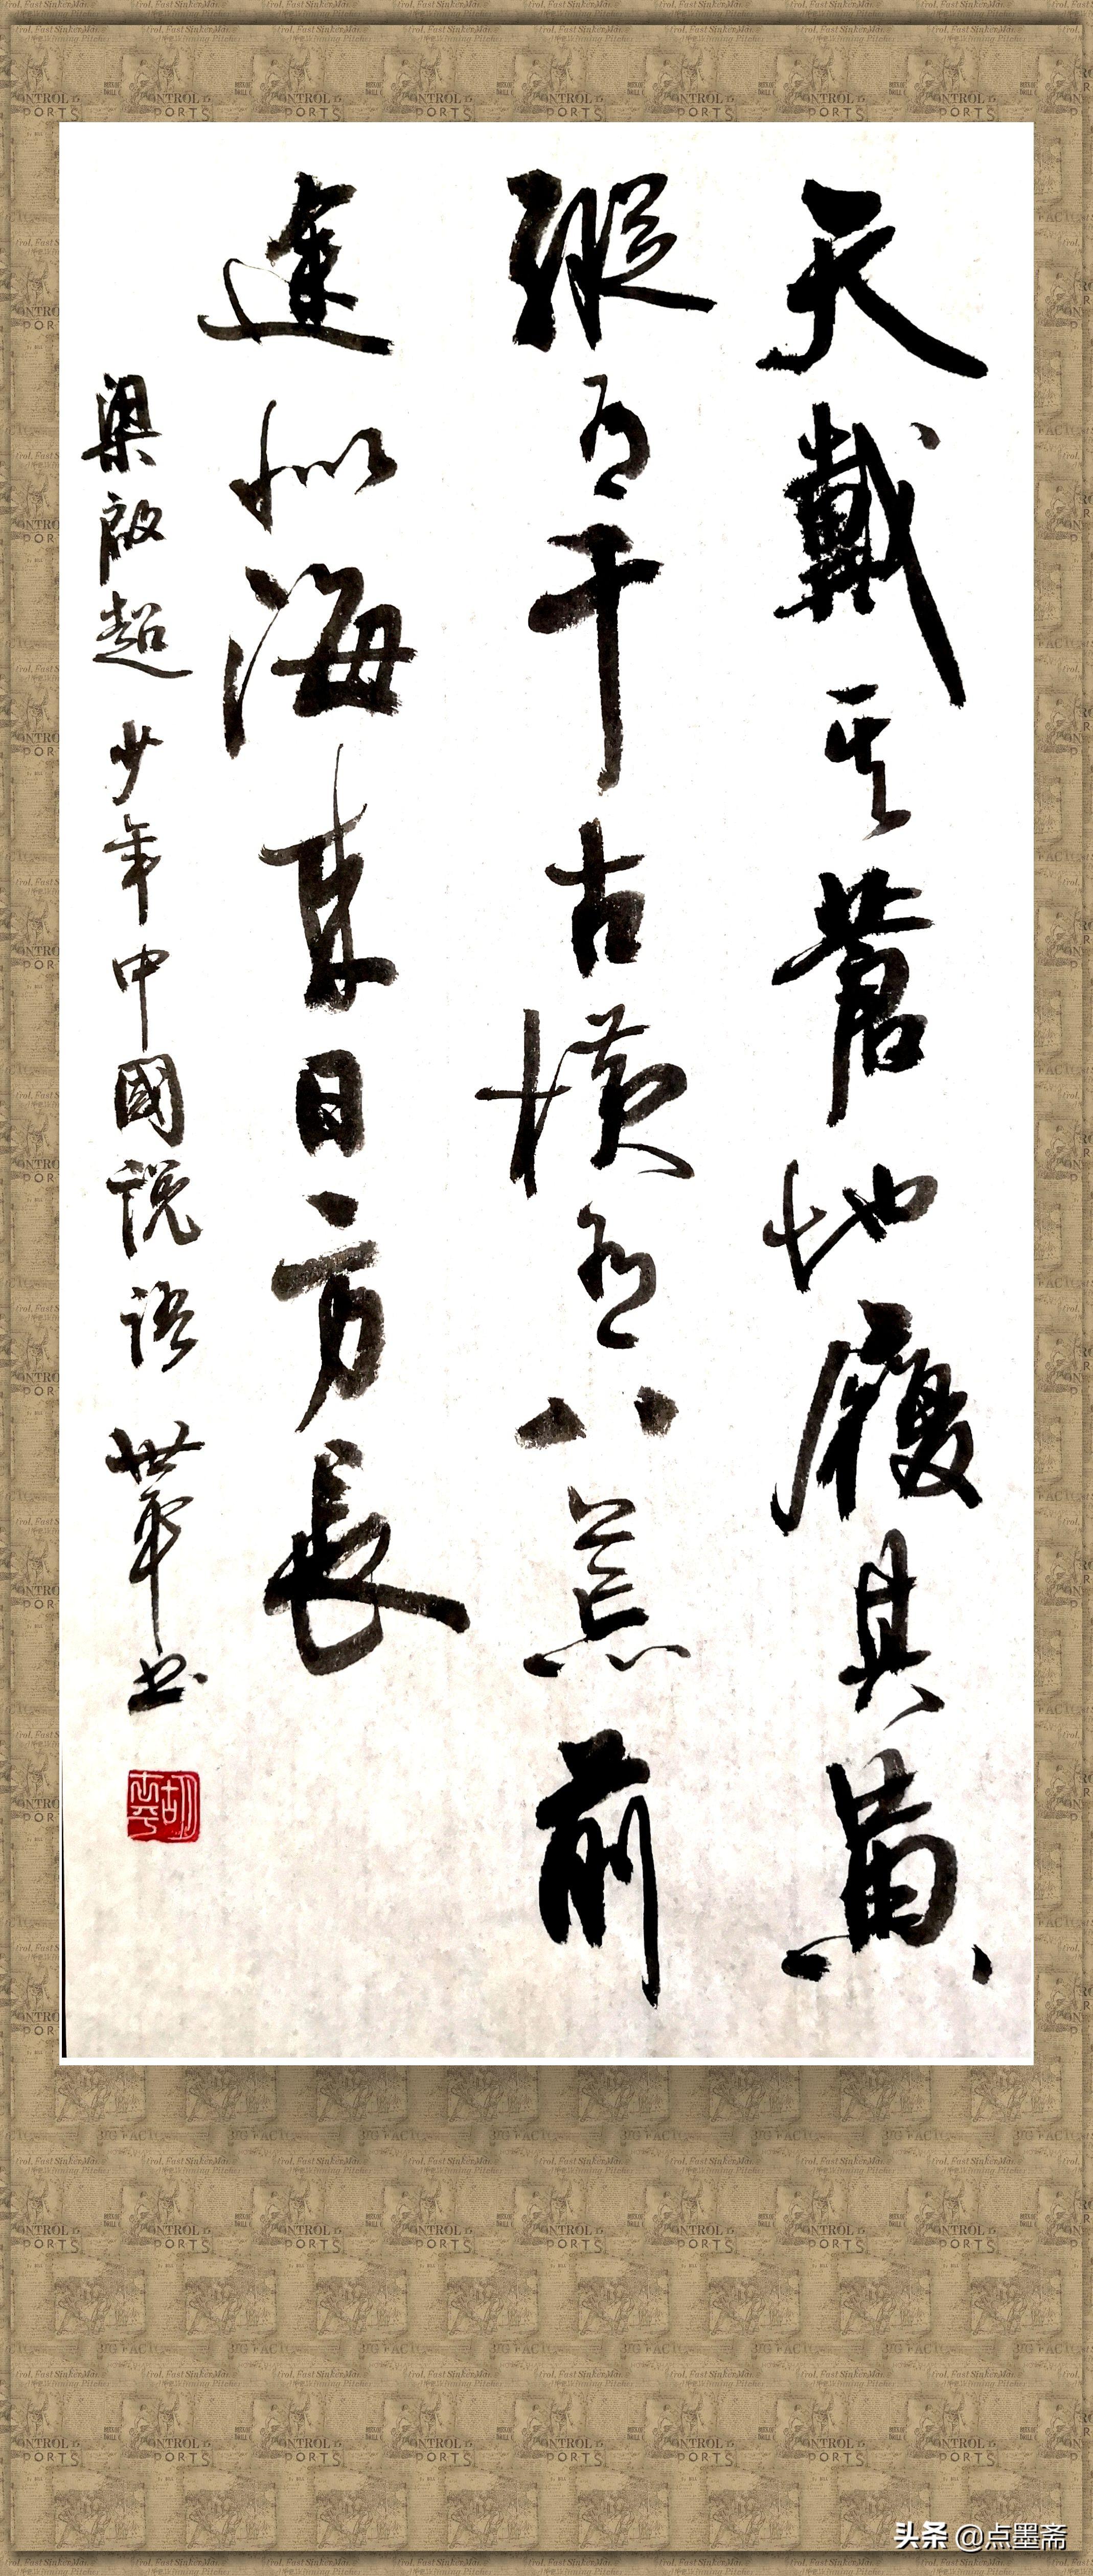 Running Script Banner: An Excerpt from Liang Qichao's "Young China"